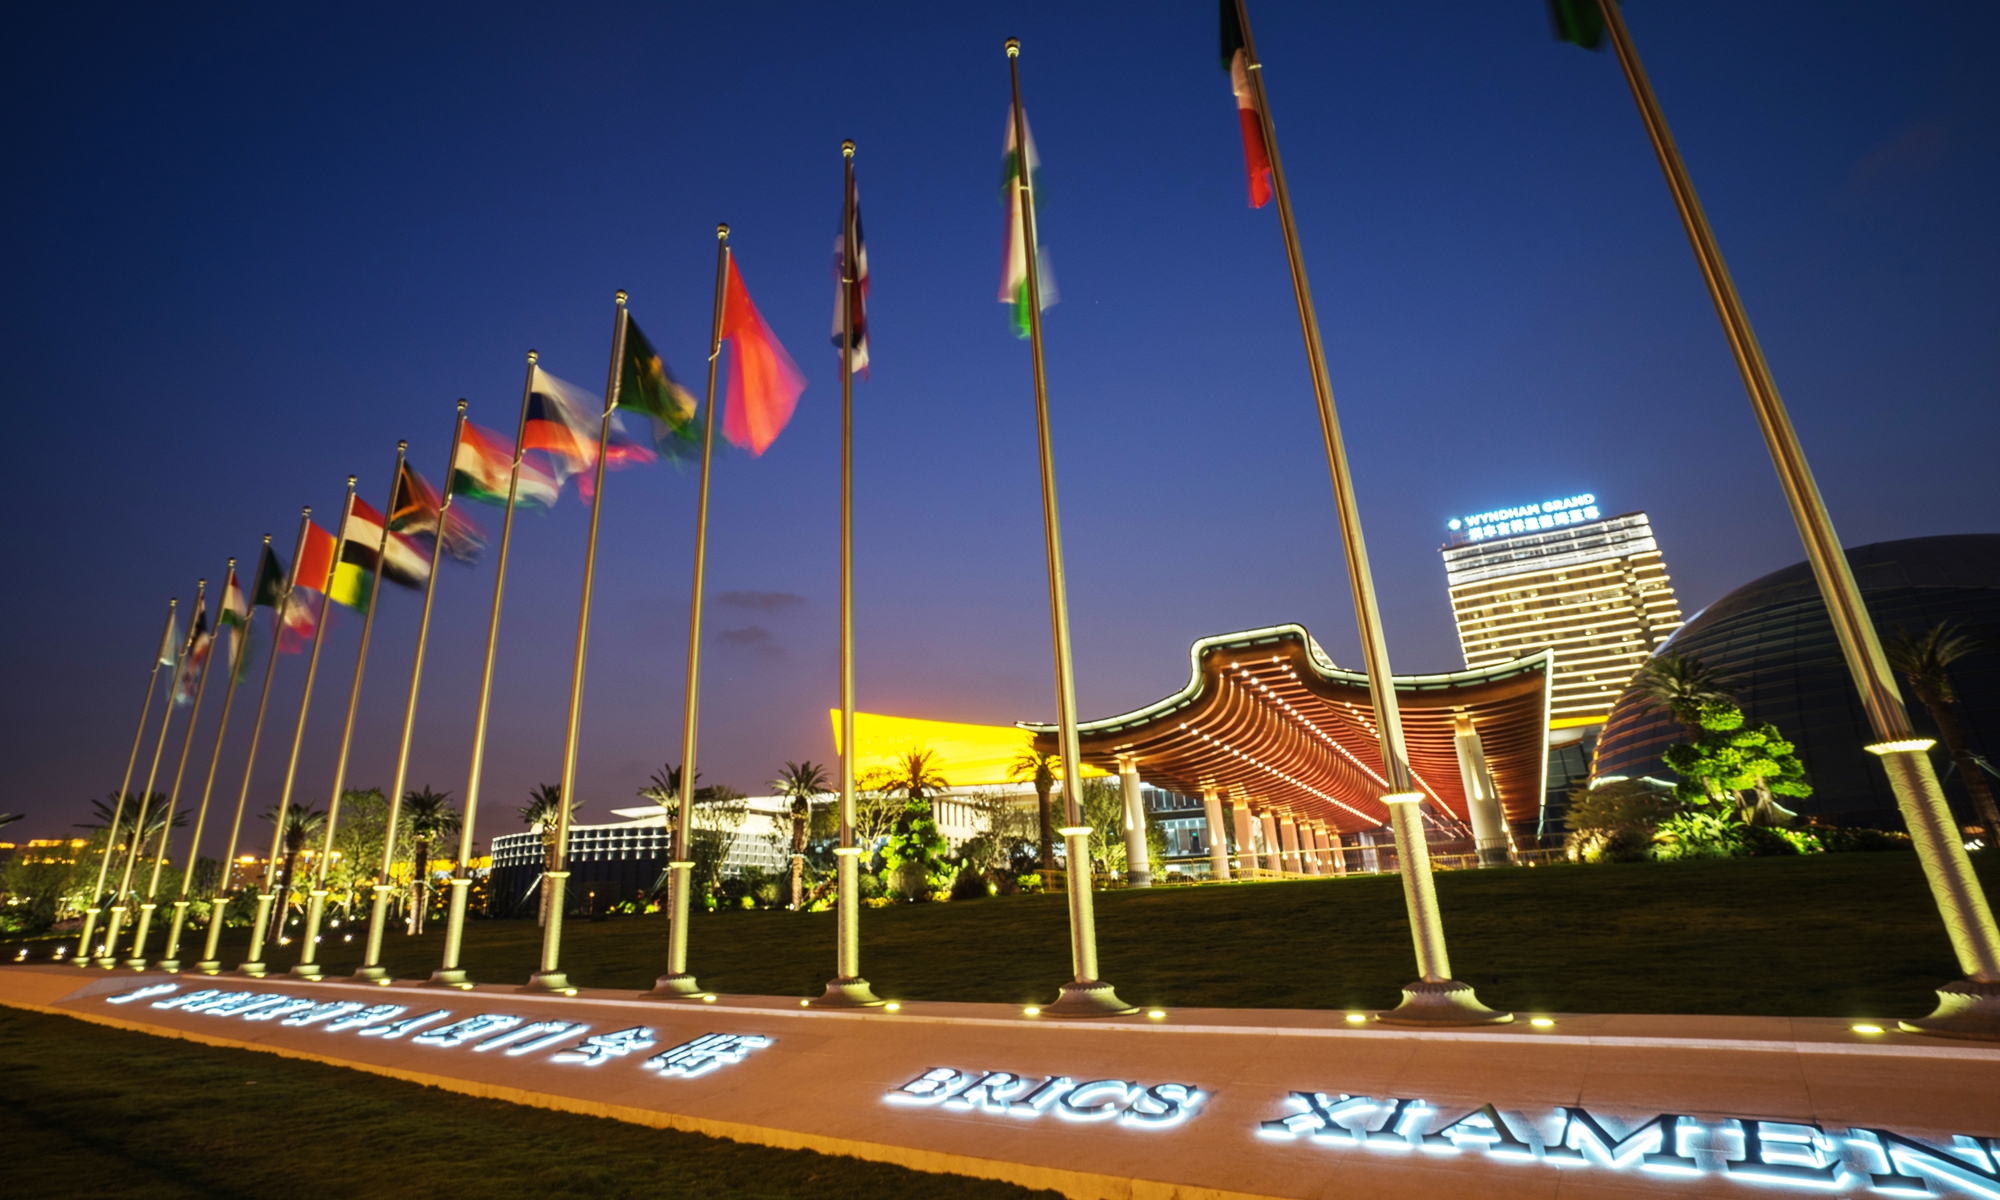 Night view of the site of BRICS Summit in Xiamen International Conference Center, China Photo: VCG